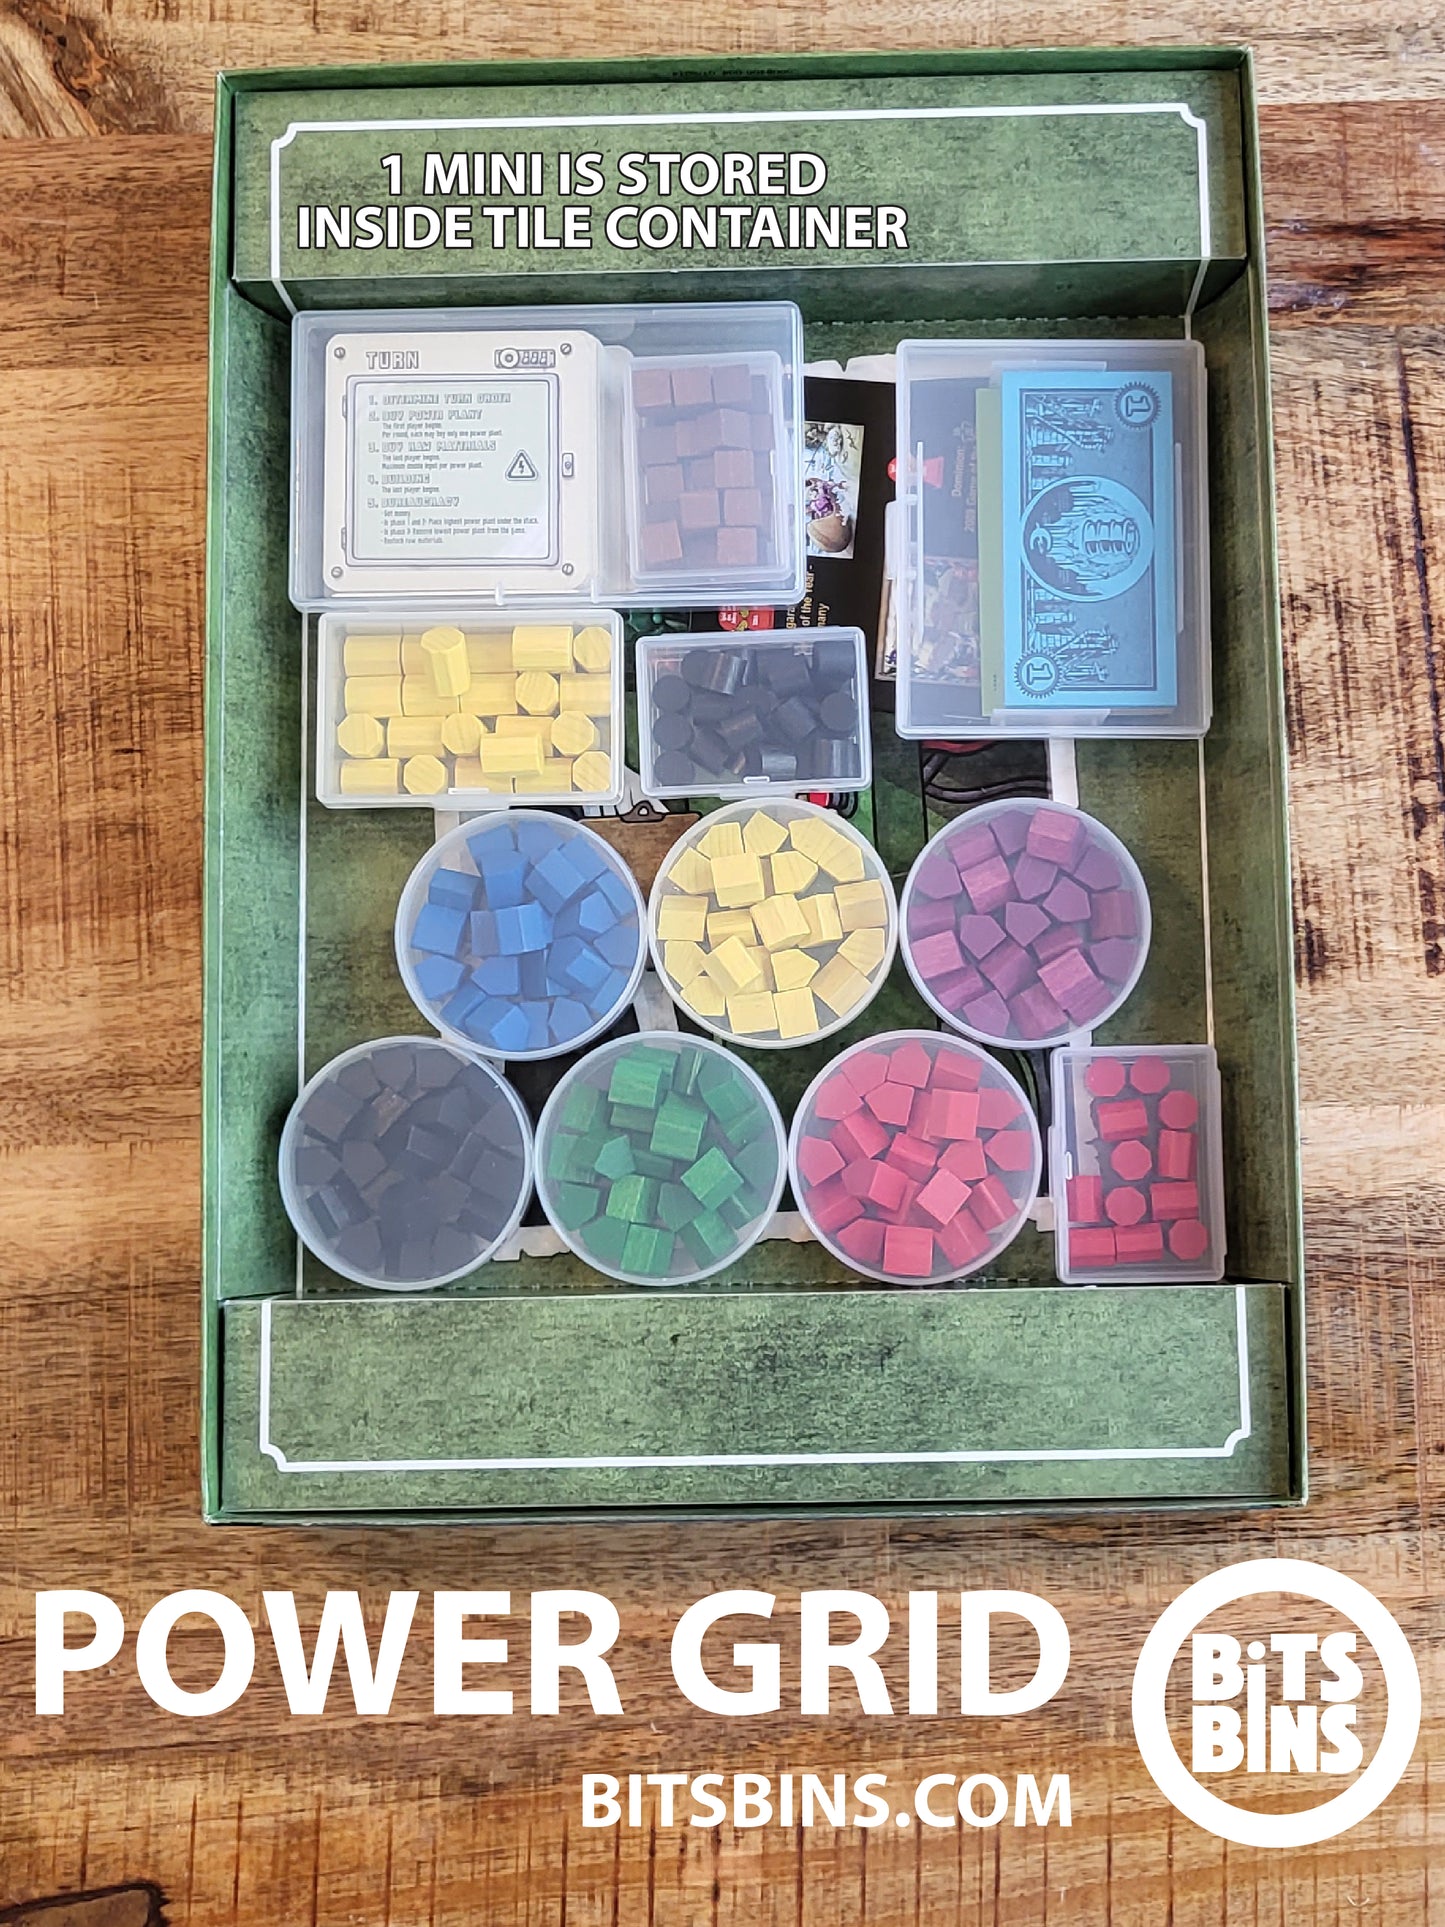 RECOMMENDED Bitsbins Power Grid - 6 Pods, 3 Minis, 1 Original, 1 Card Box, 1 Tile